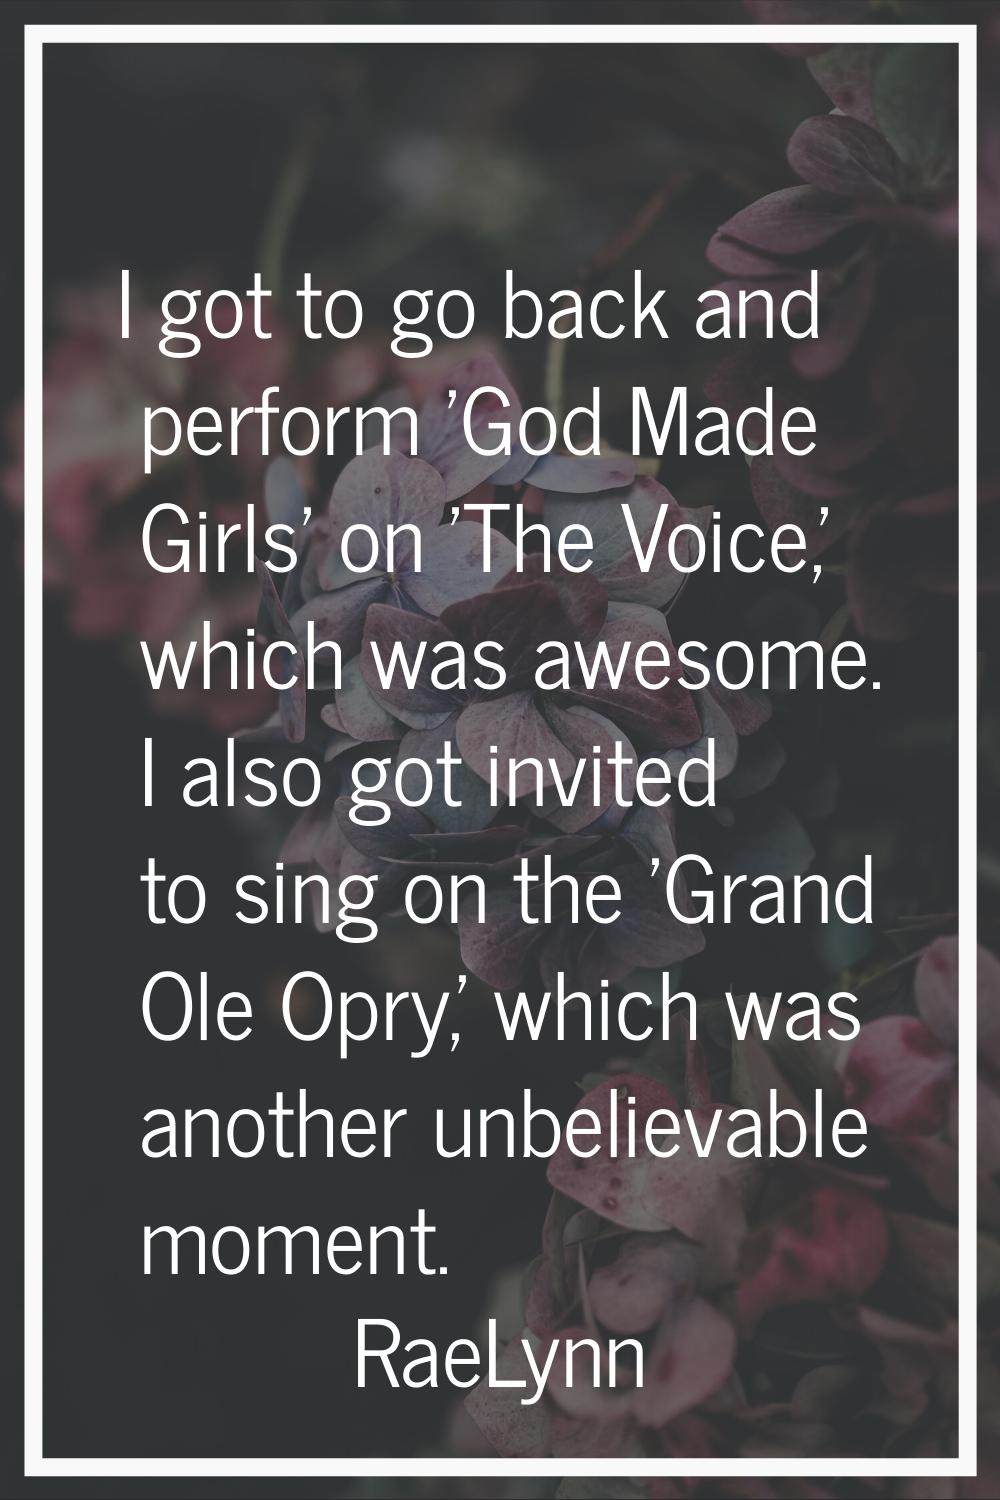 I got to go back and perform 'God Made Girls' on 'The Voice,' which was awesome. I also got invited